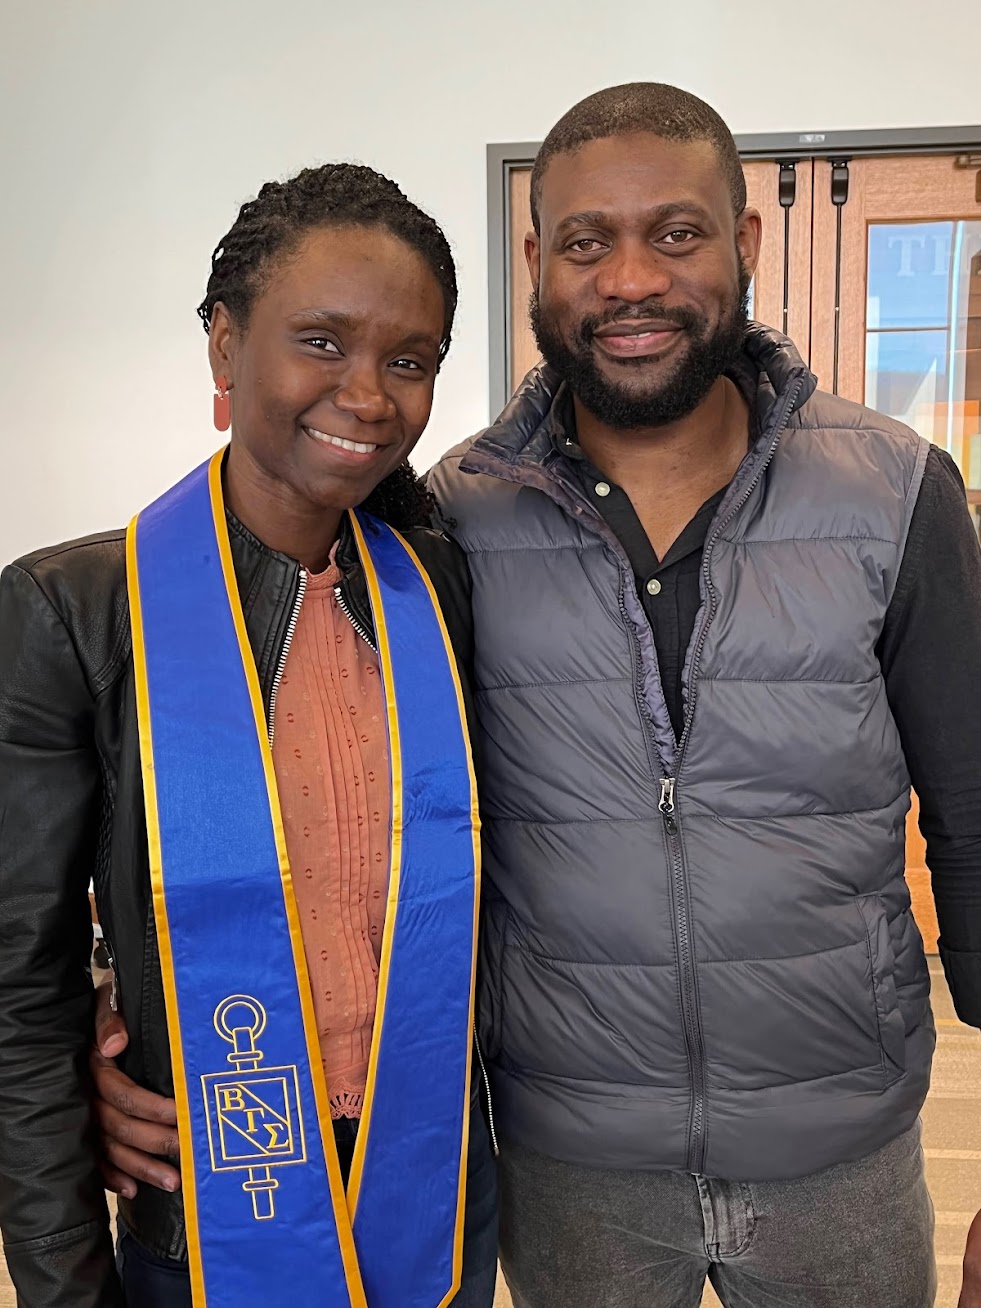 IN THE PHOTO (from left): Beta Gamma Sigma inductee and MBA candidate Tamika Barrett with Dwayne Hibbert 